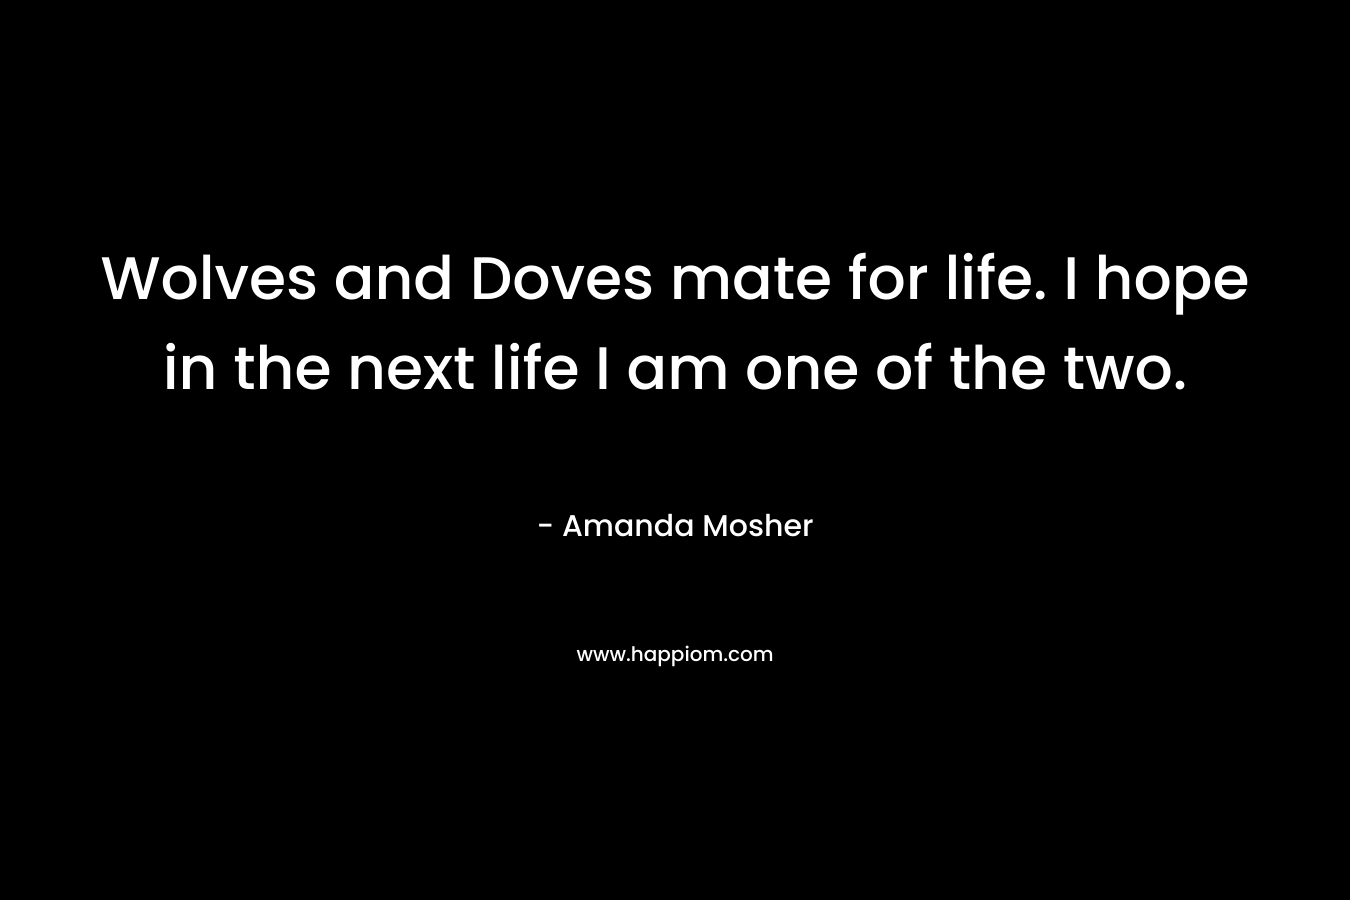 Wolves and Doves mate for life. I hope in the next life I am one of the two. – Amanda Mosher